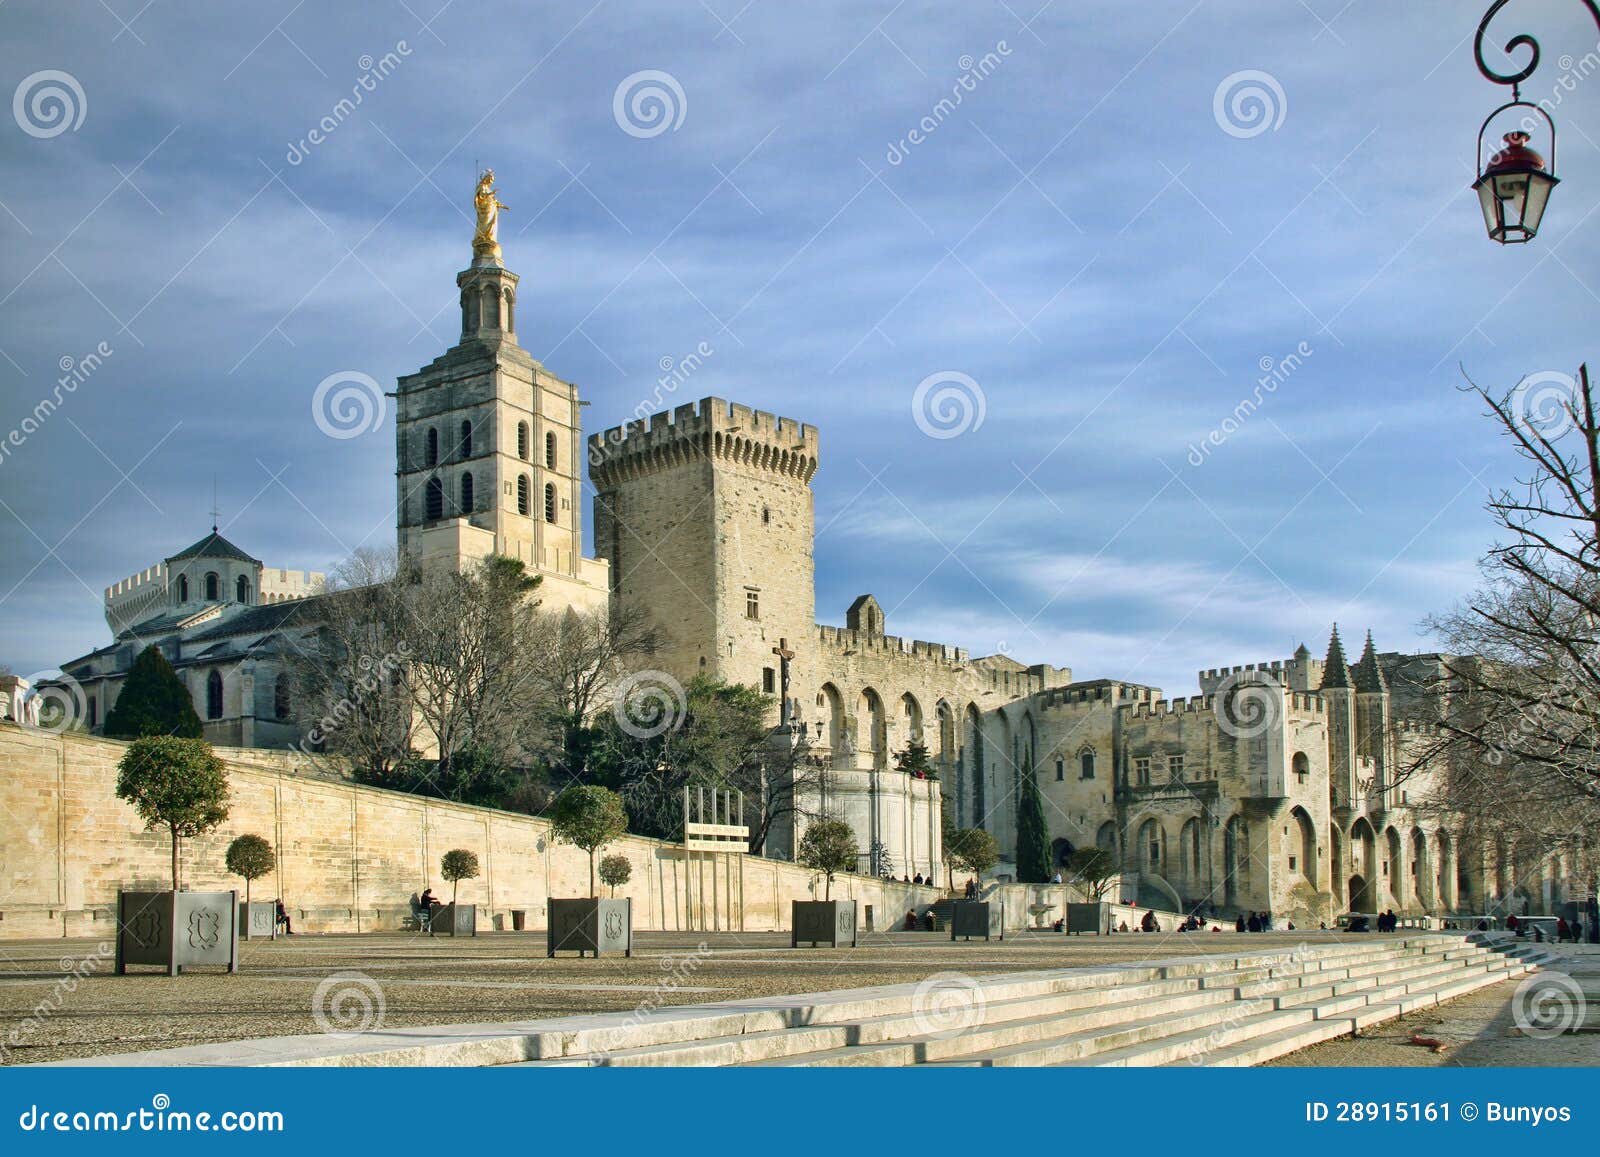 the popes' palace in avignon, france